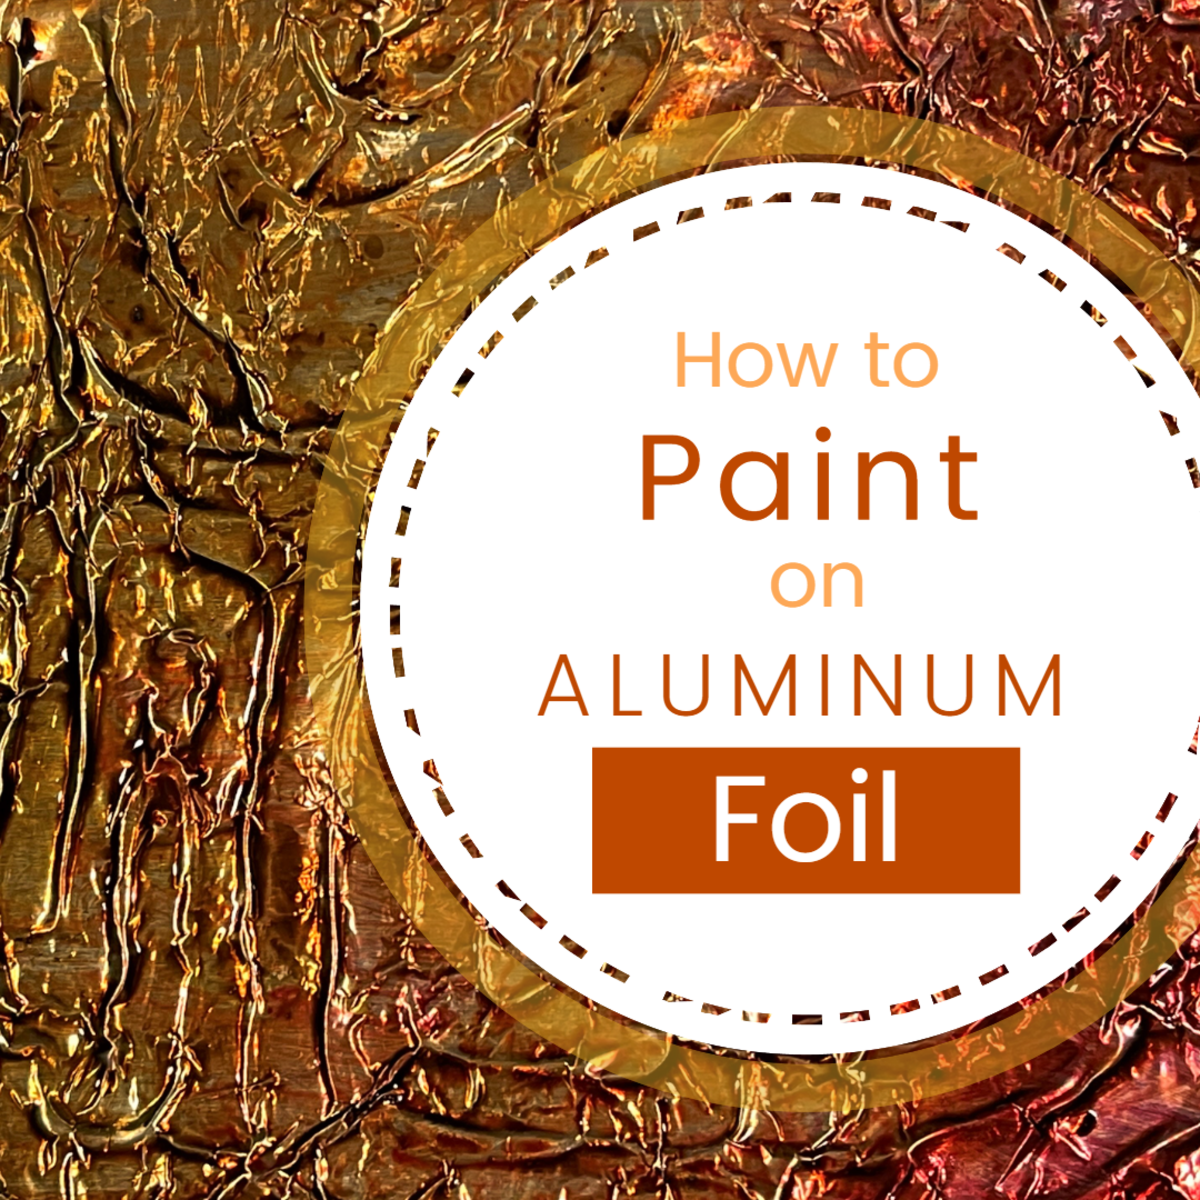 How to Paint on Aluminum Foil With Acrylics